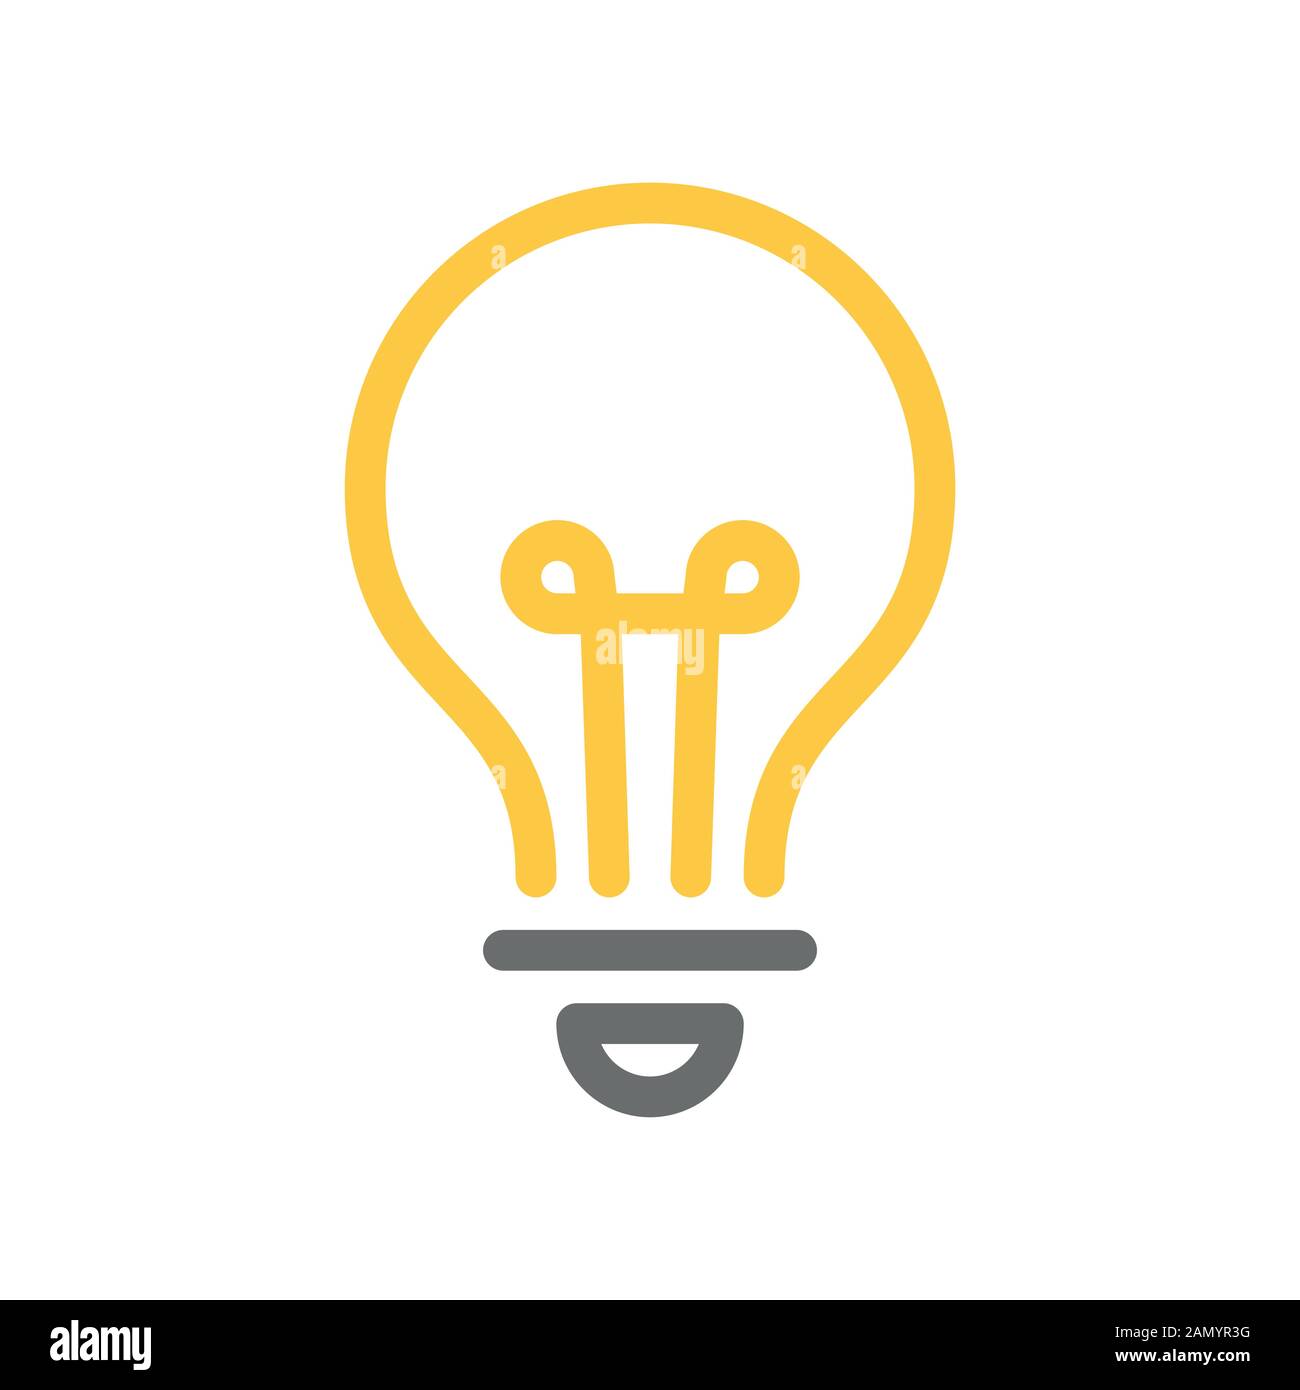 Light Bulb Line Icon Isolated On White Royalty Free Vector, 54% OFF